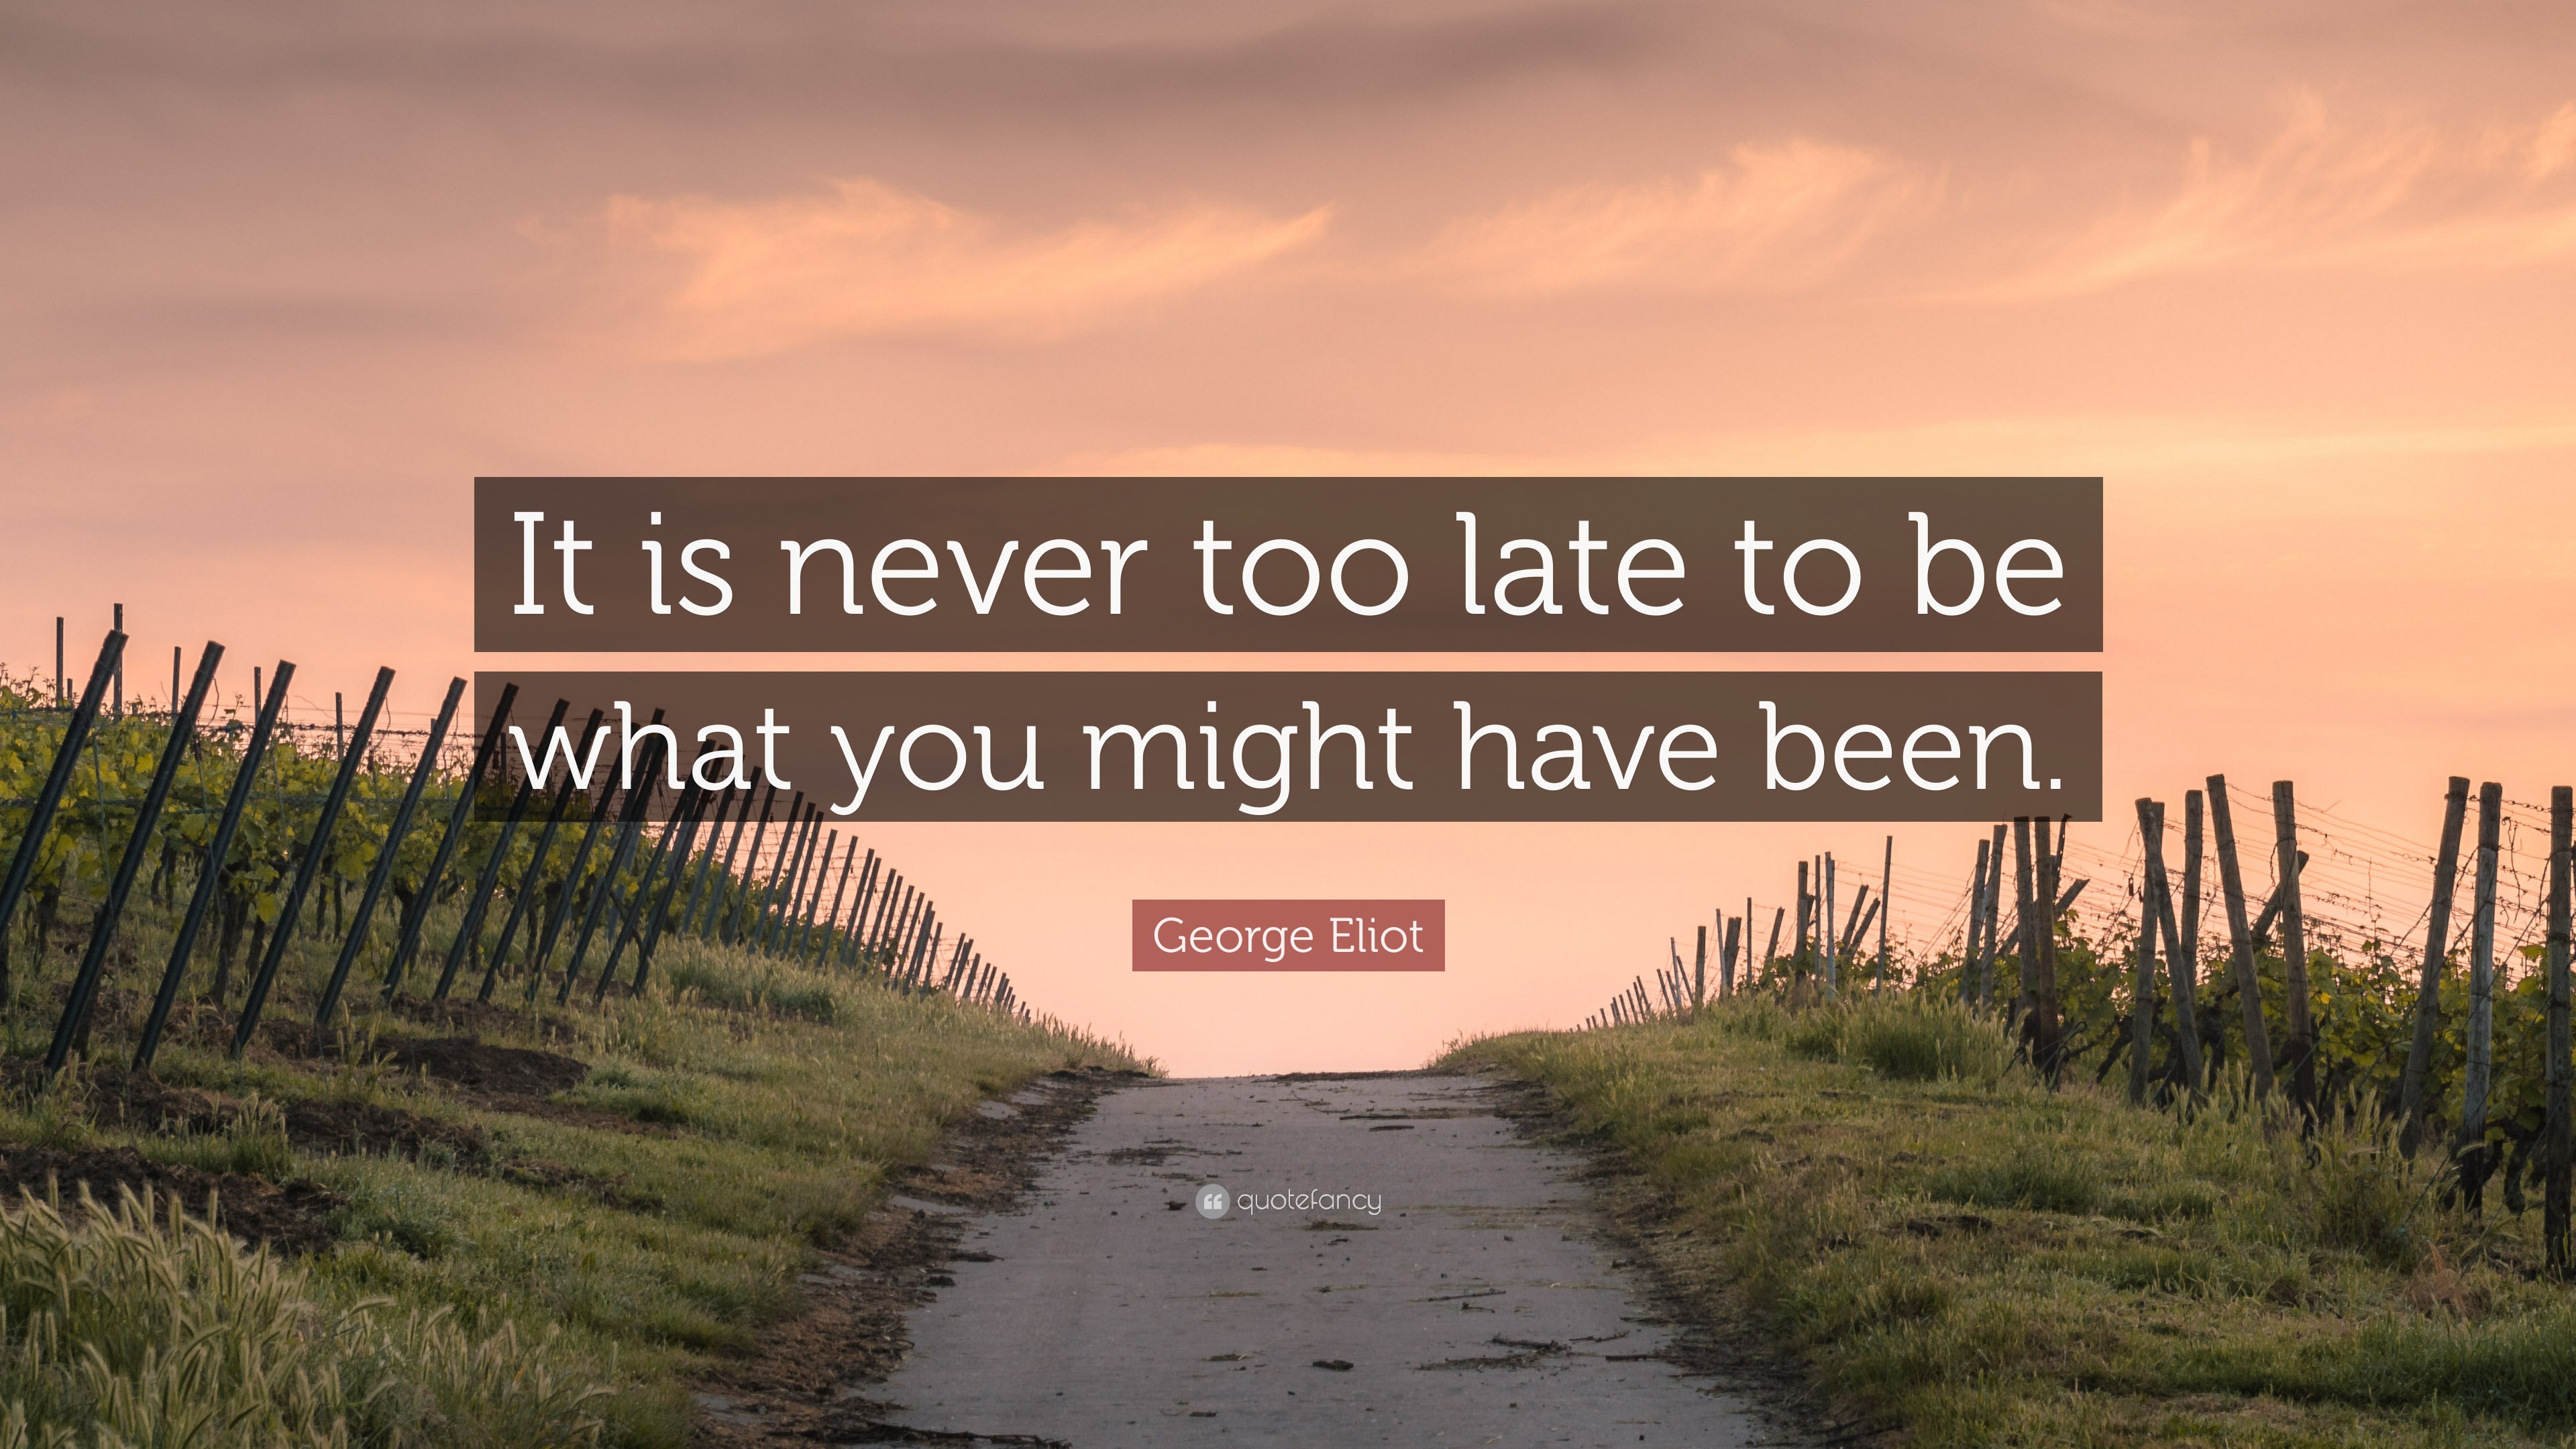 George Eliot Quote: “It is never too late to be what you might have been.”